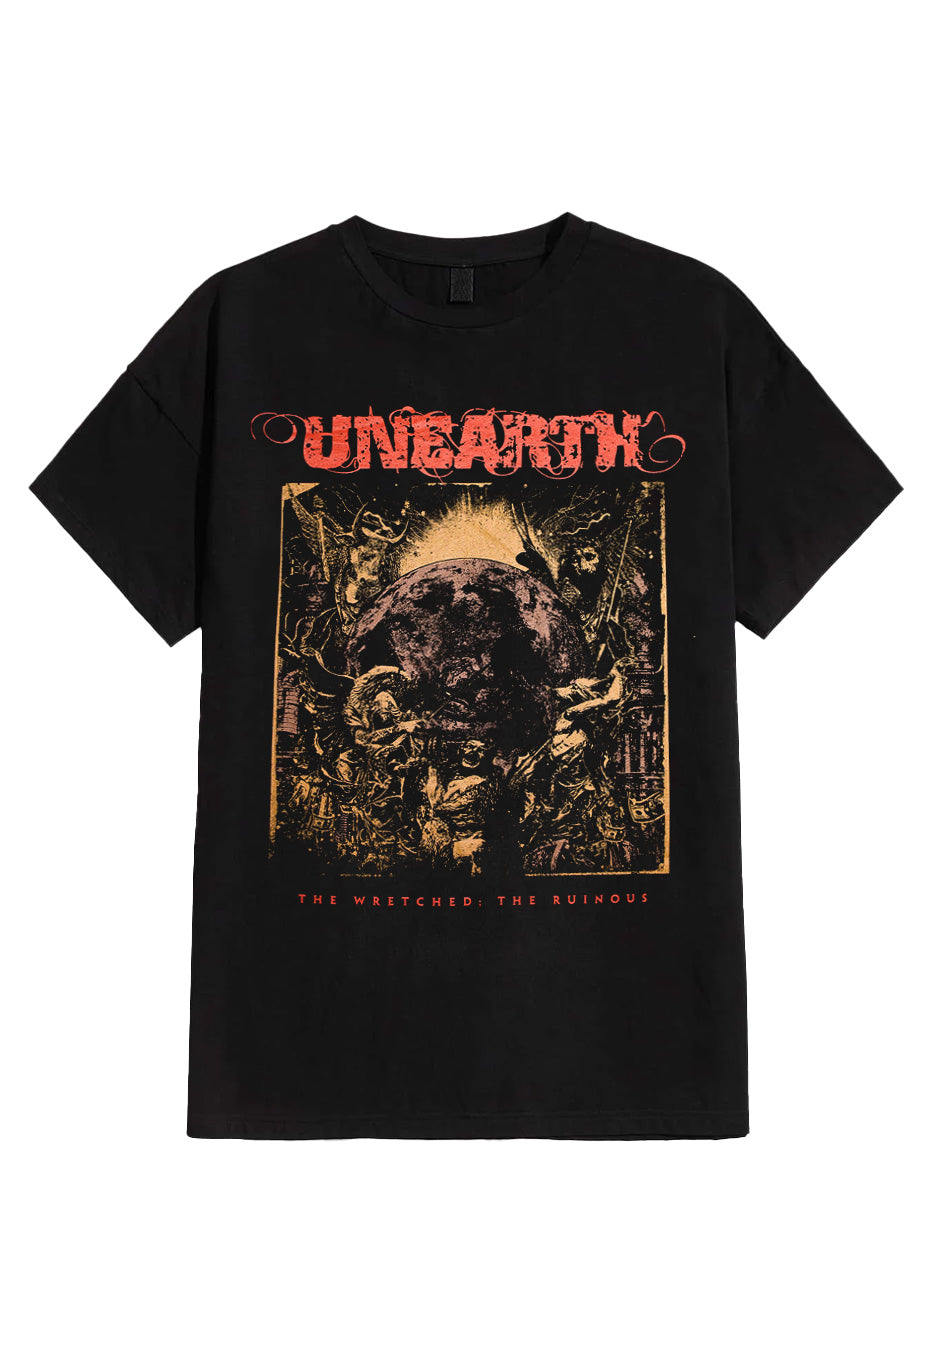 Unearth - The Wretched The Ruinous Album Cover - T-Shirt